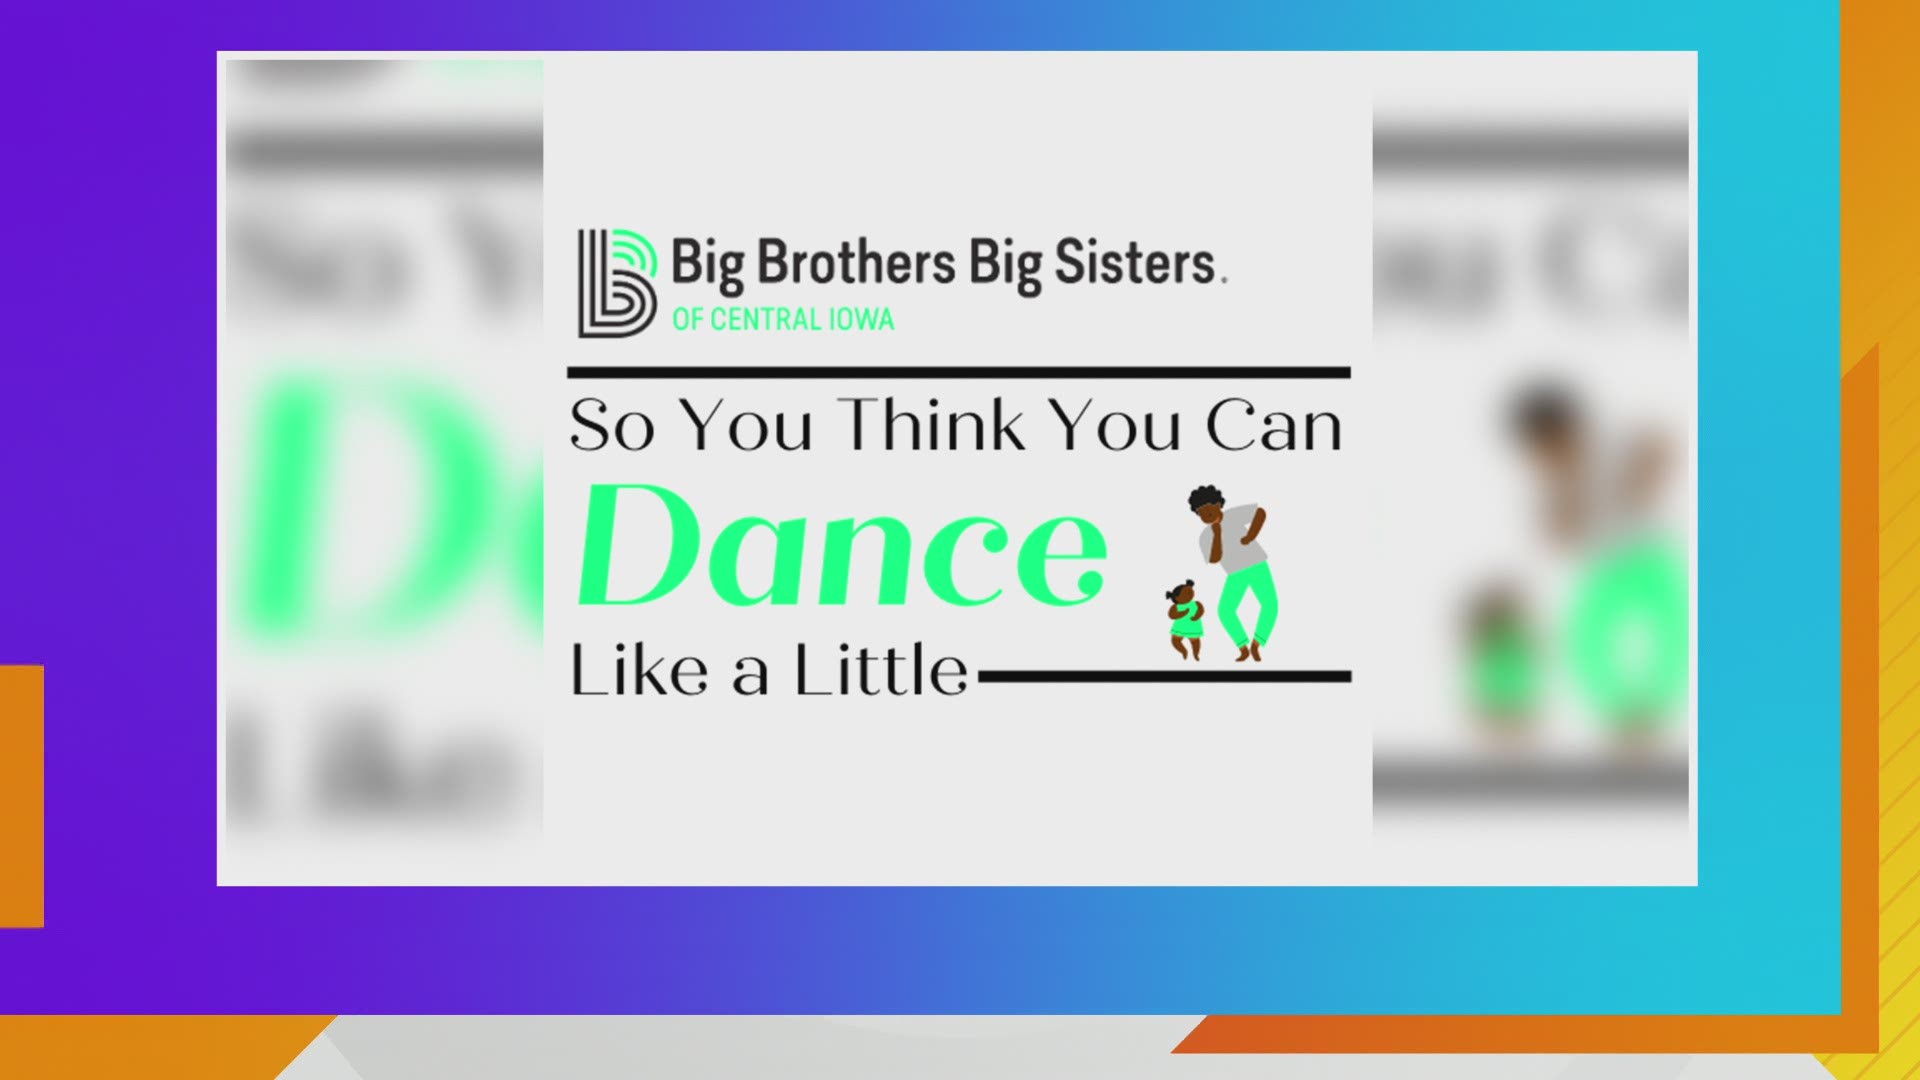 Big Brothers Big Sisters of Central Iowa tells us about their So You Think You Can Dance Like a Little Event